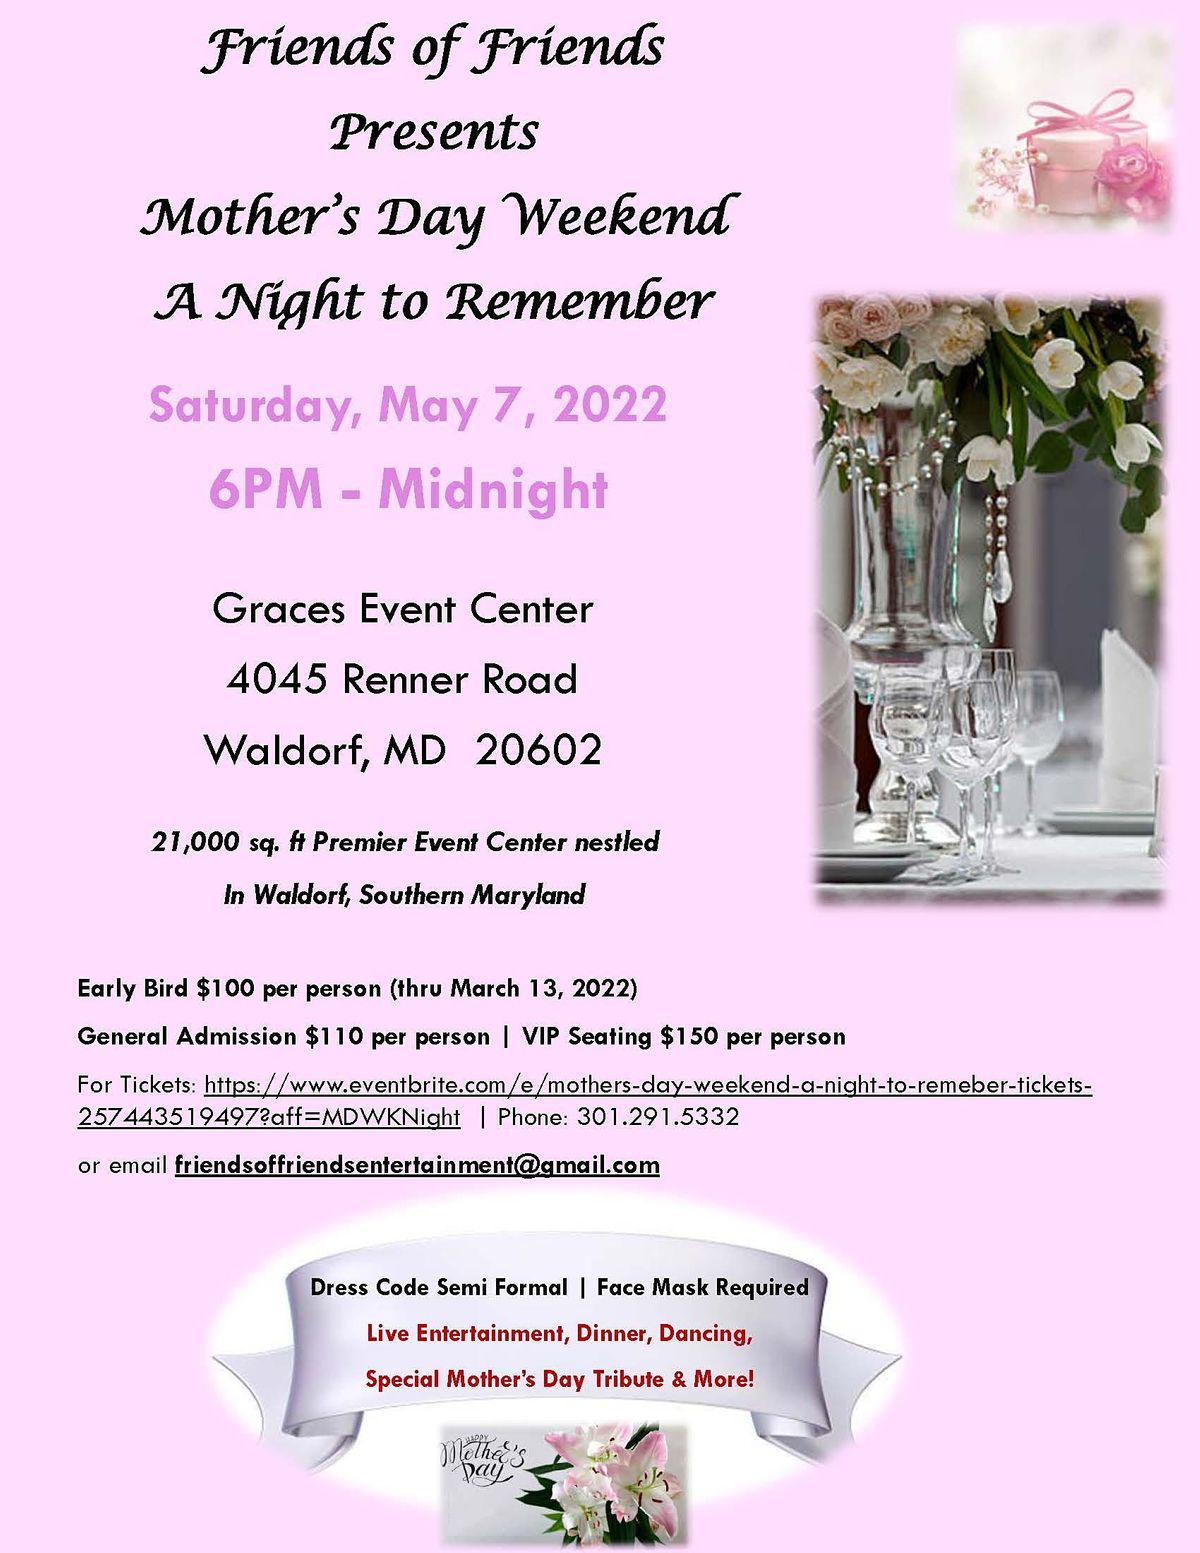 Mothers Day Weekend A Night to Remember | Graces Event Center, Waldorf, MD | May 7 to May 8